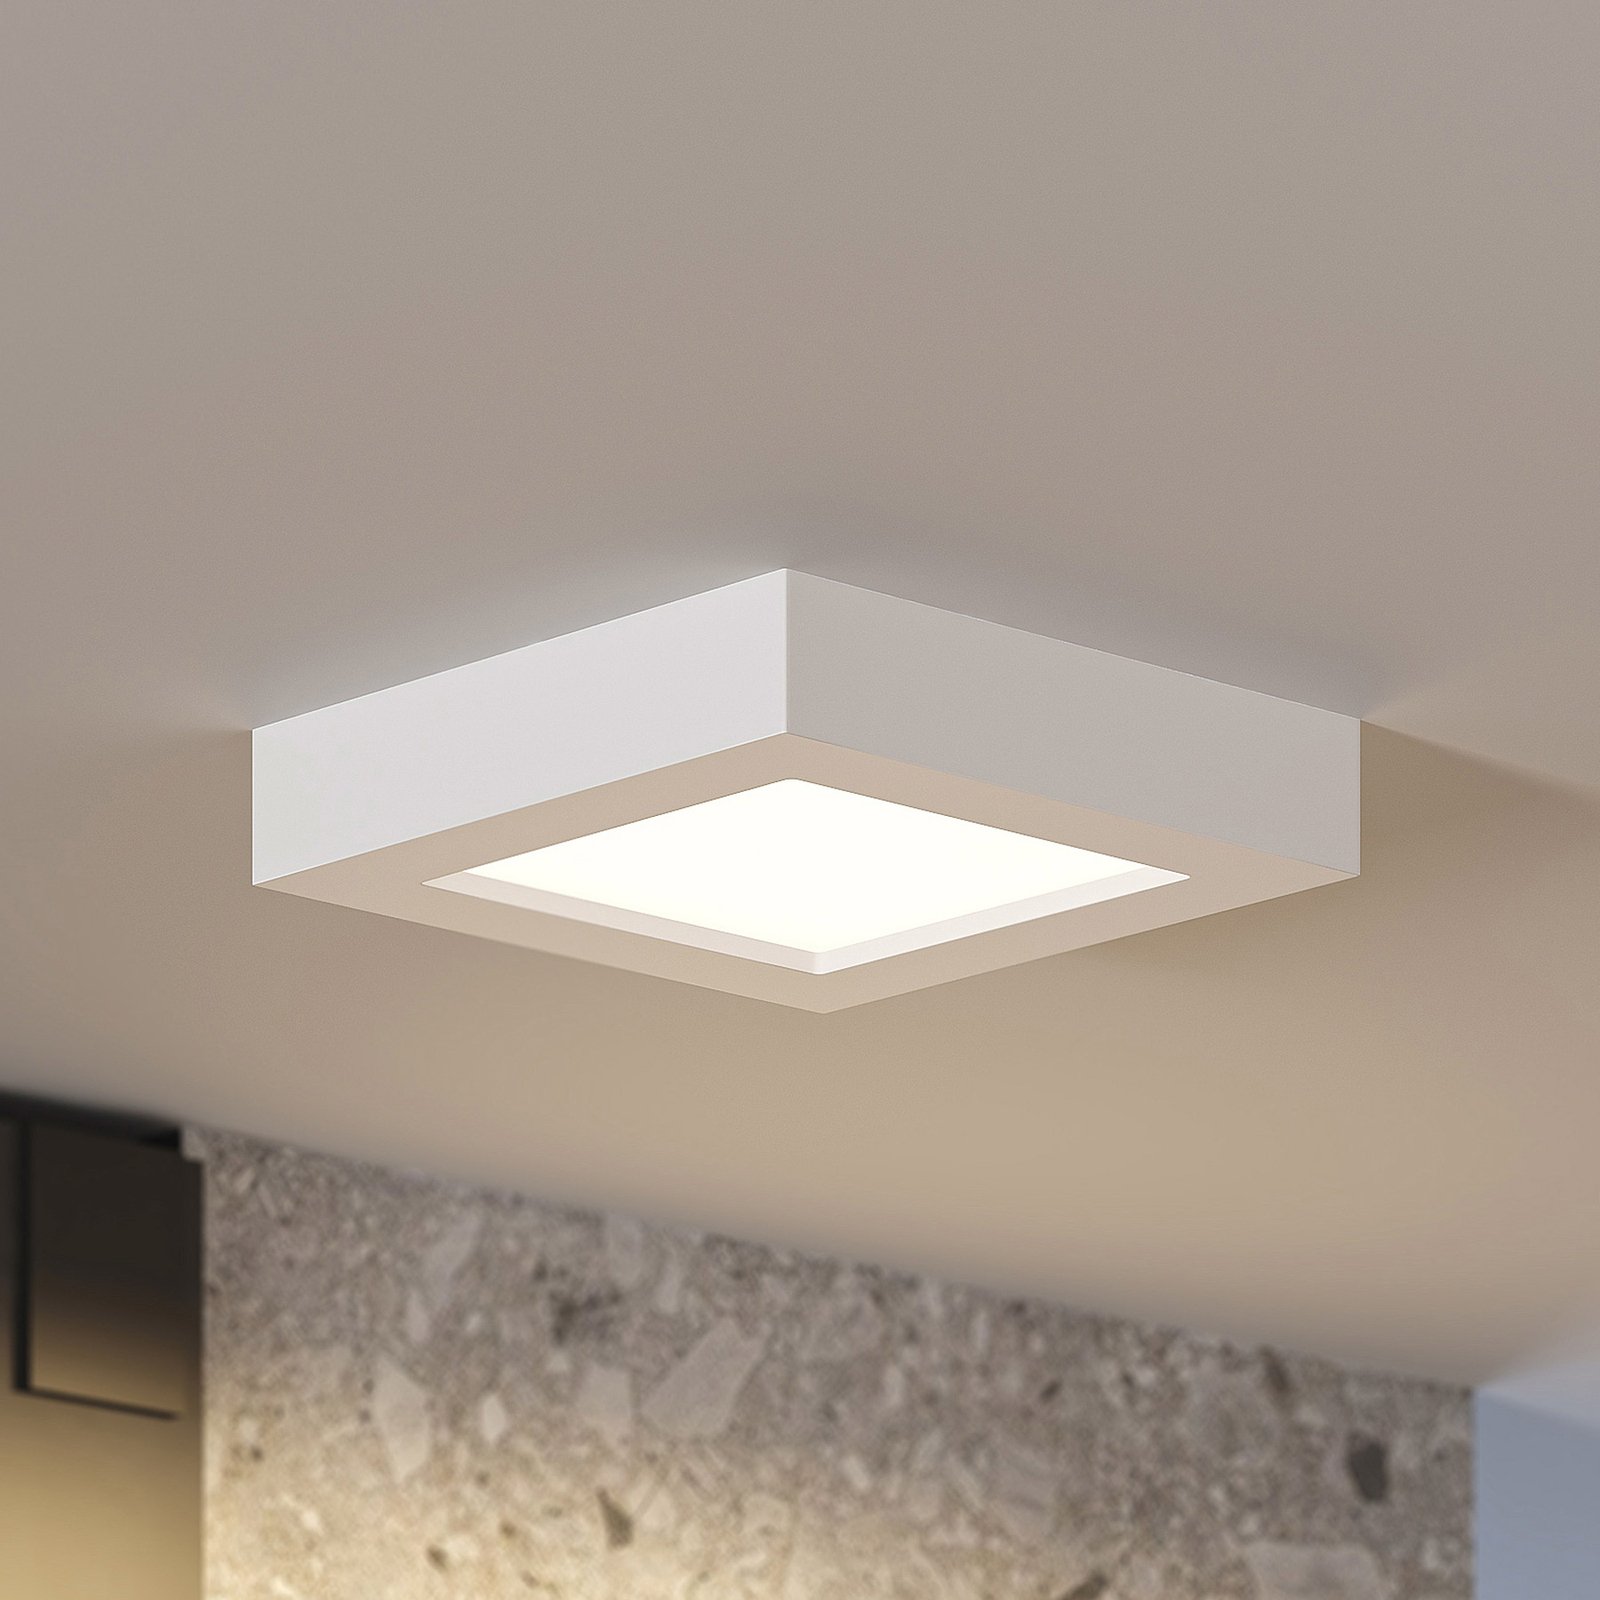 Prios LED ceiling light Alette, white, 17.2 cm, dimmable